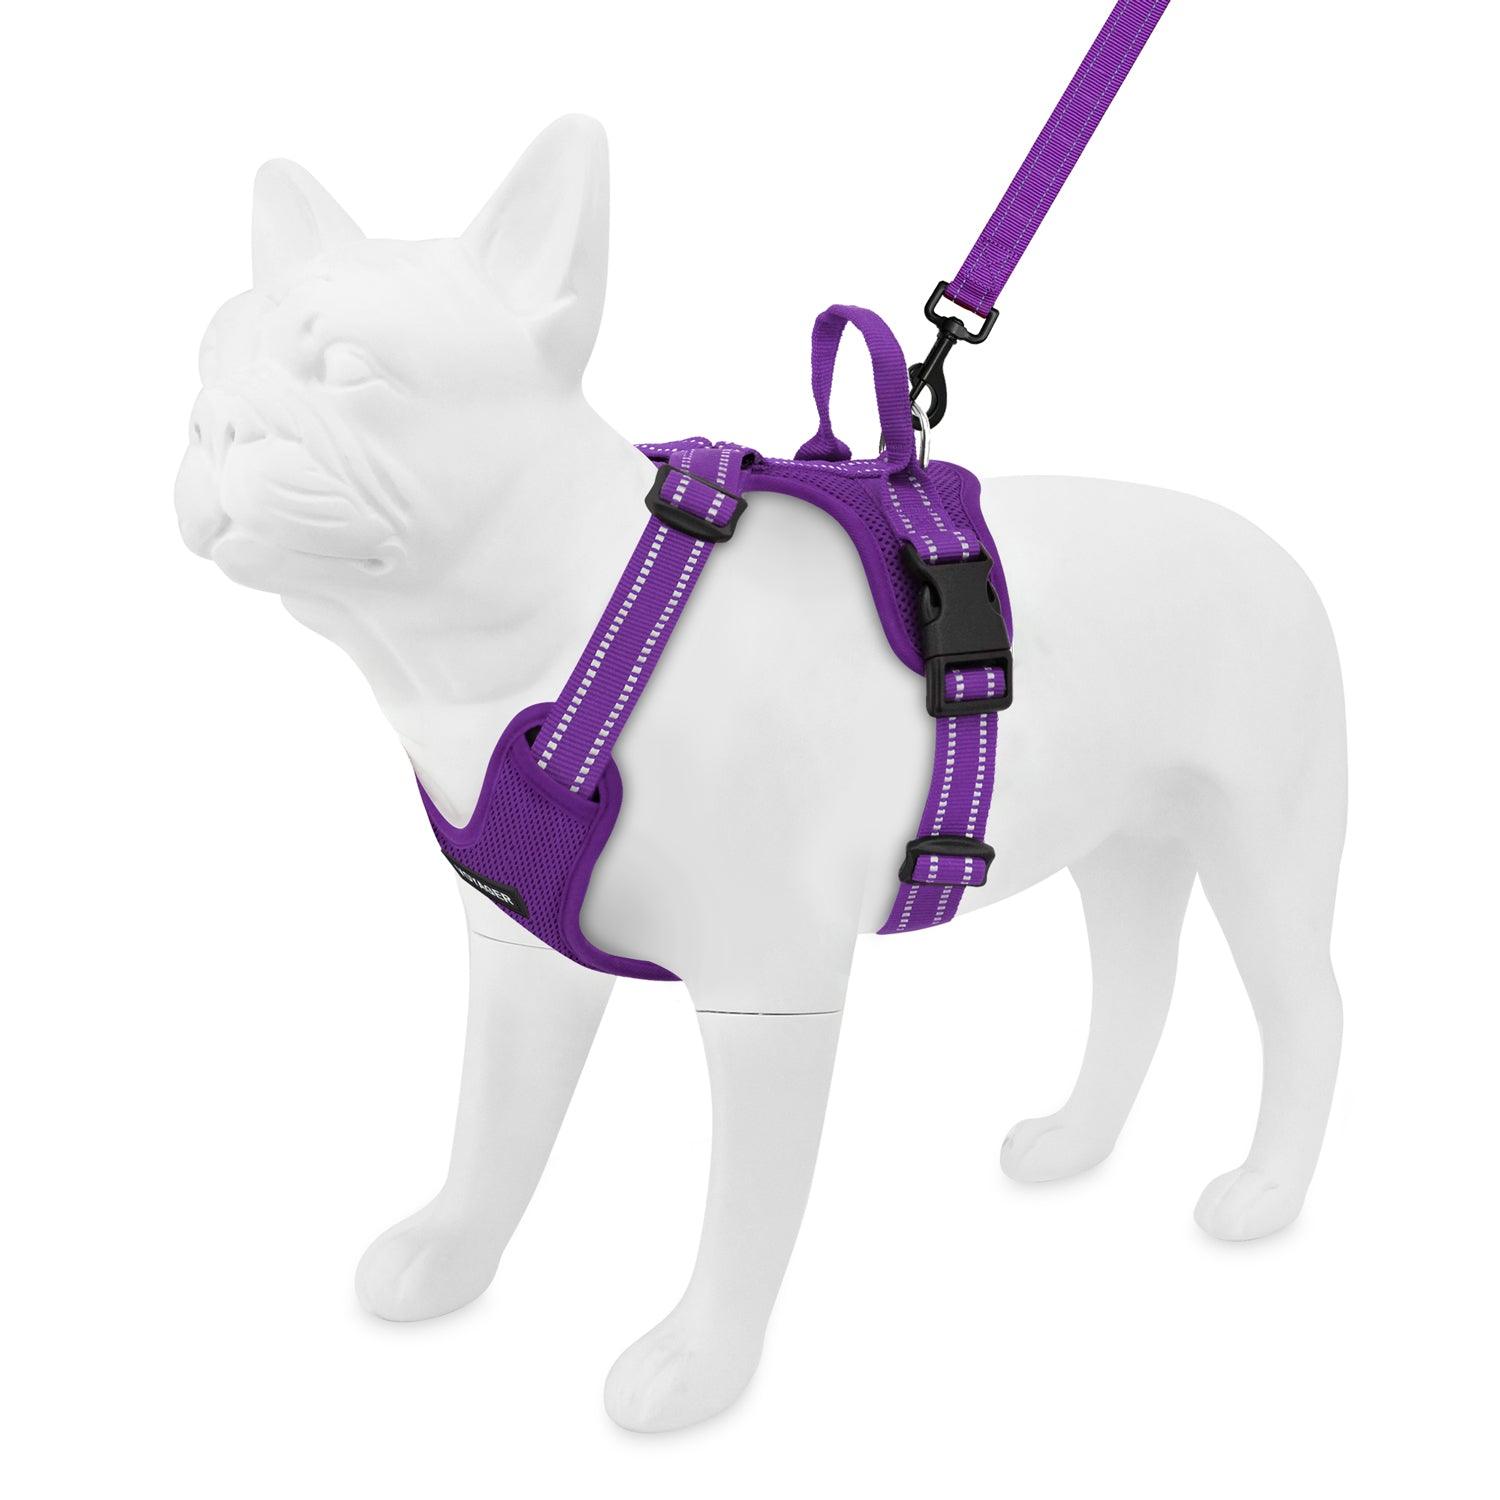 Halloween Air Frontier Harness And Leash Set - VOYAGER Dog Harnesses